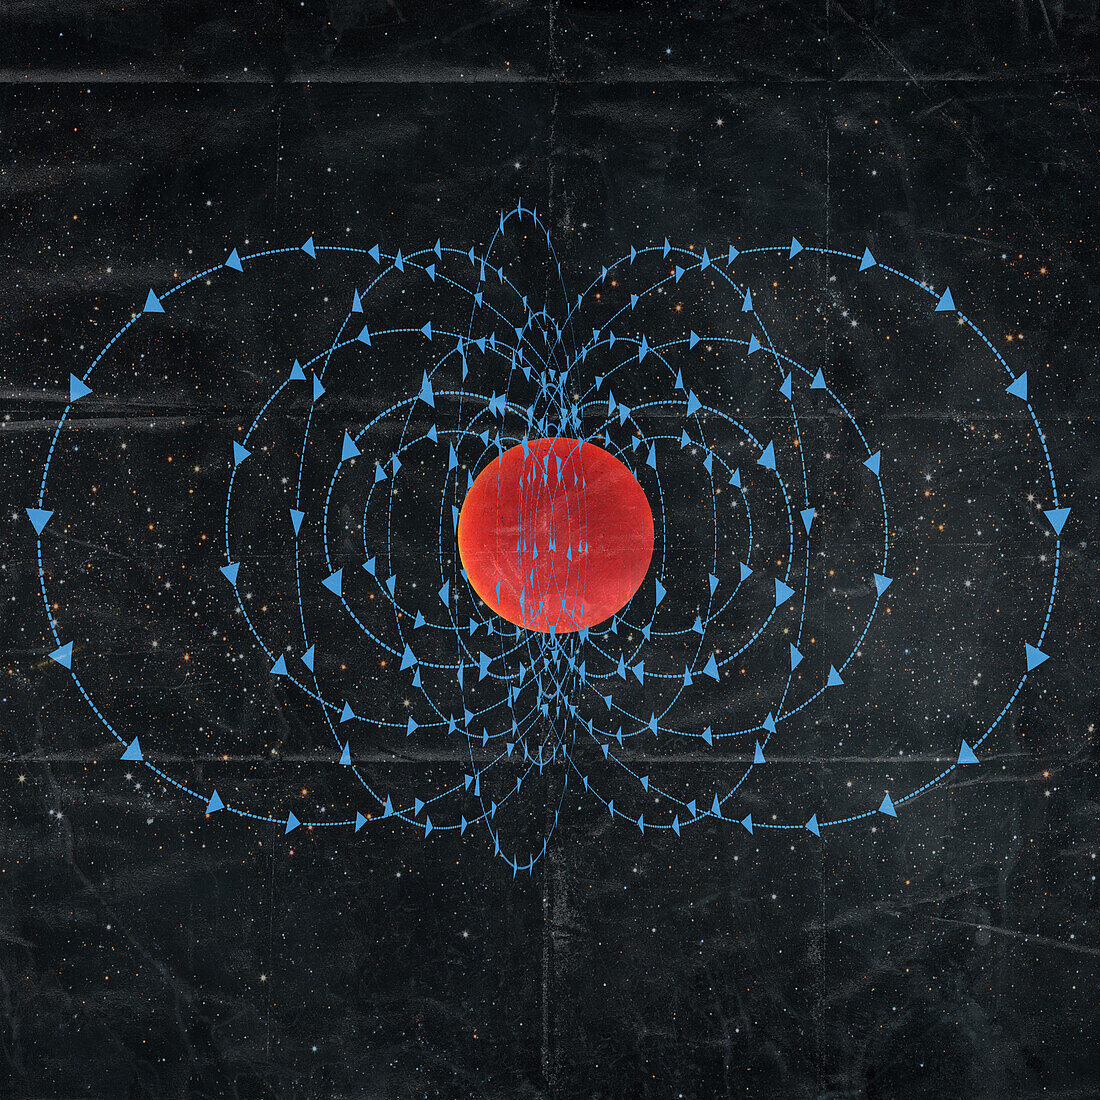 Red dwarf with magnetic field lines, illustration